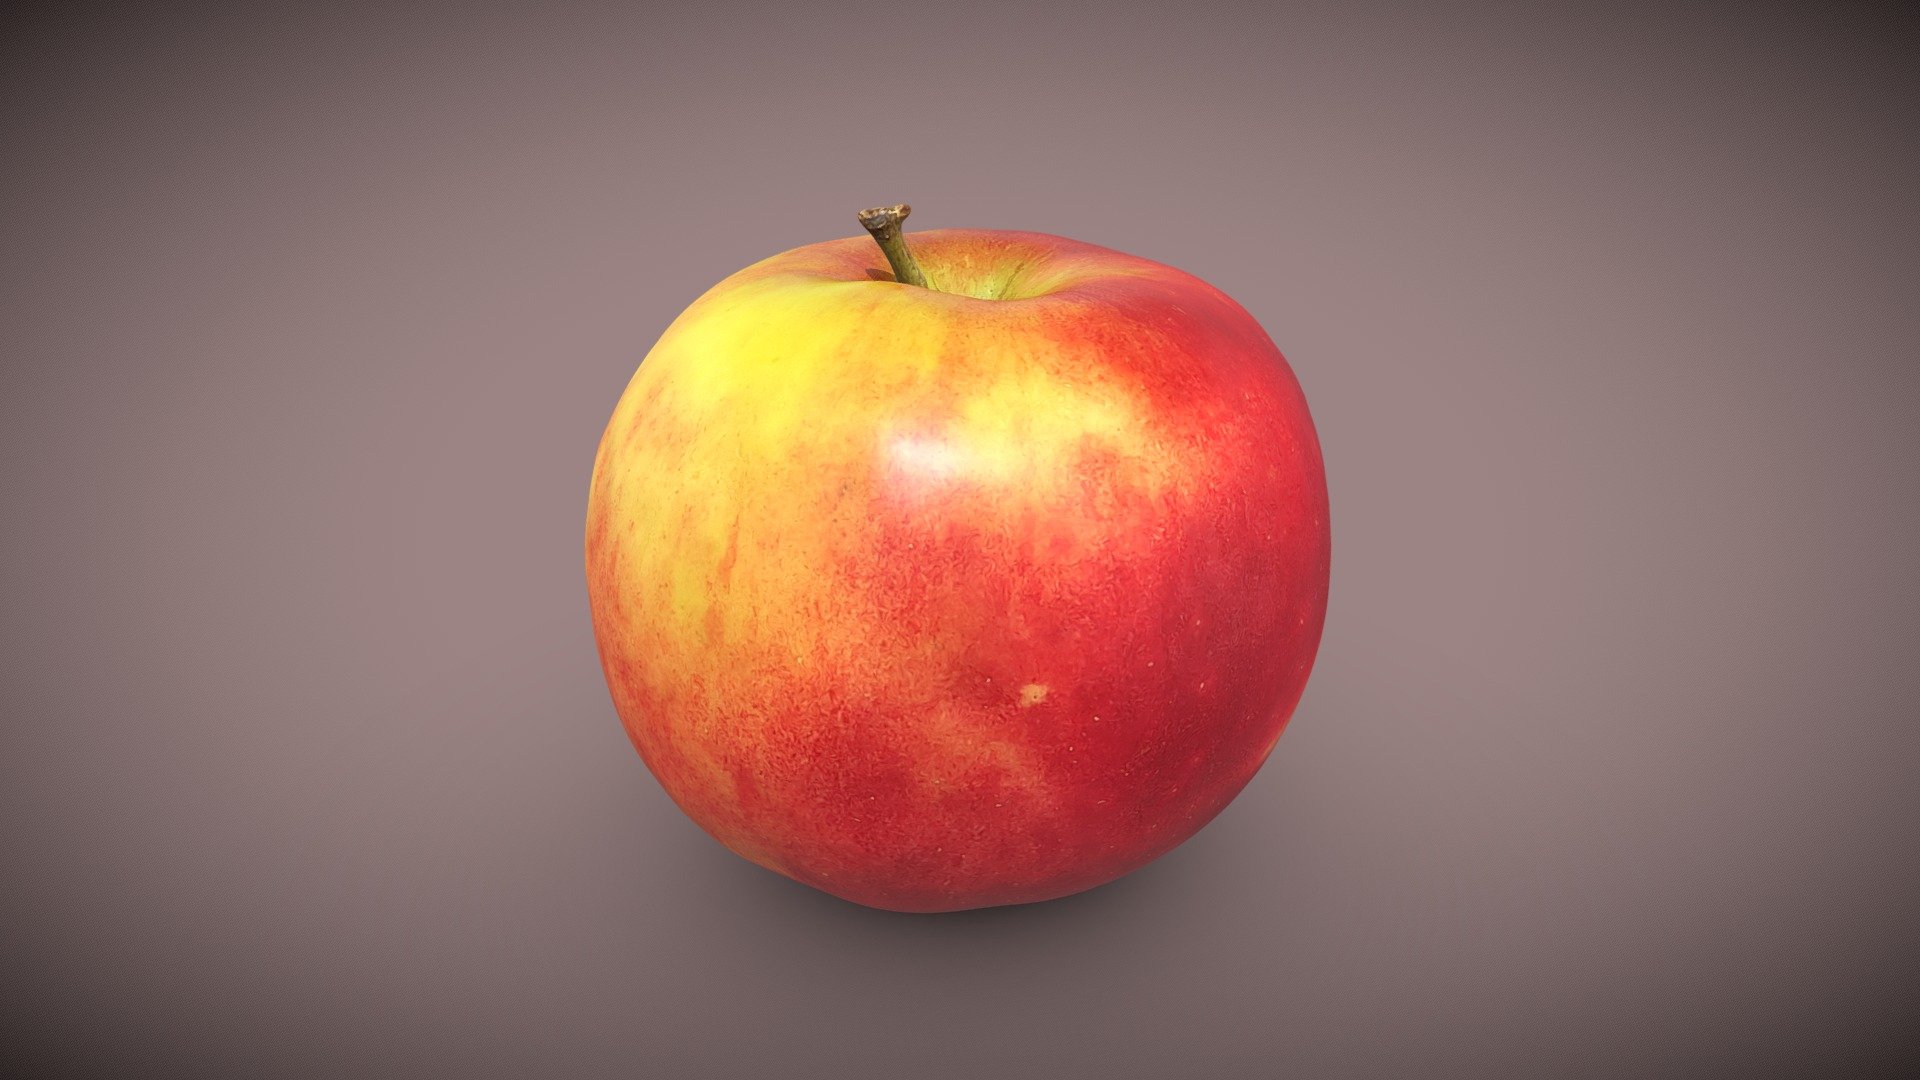 Agisoft Metashape. 199 photos / 16mp

Texture downscale to [4096x4096, png]

Aligned and scaled
 - Яблоко | Red Apple [Scan] - Download Free 3D model by hoxsvl.scan 3d model